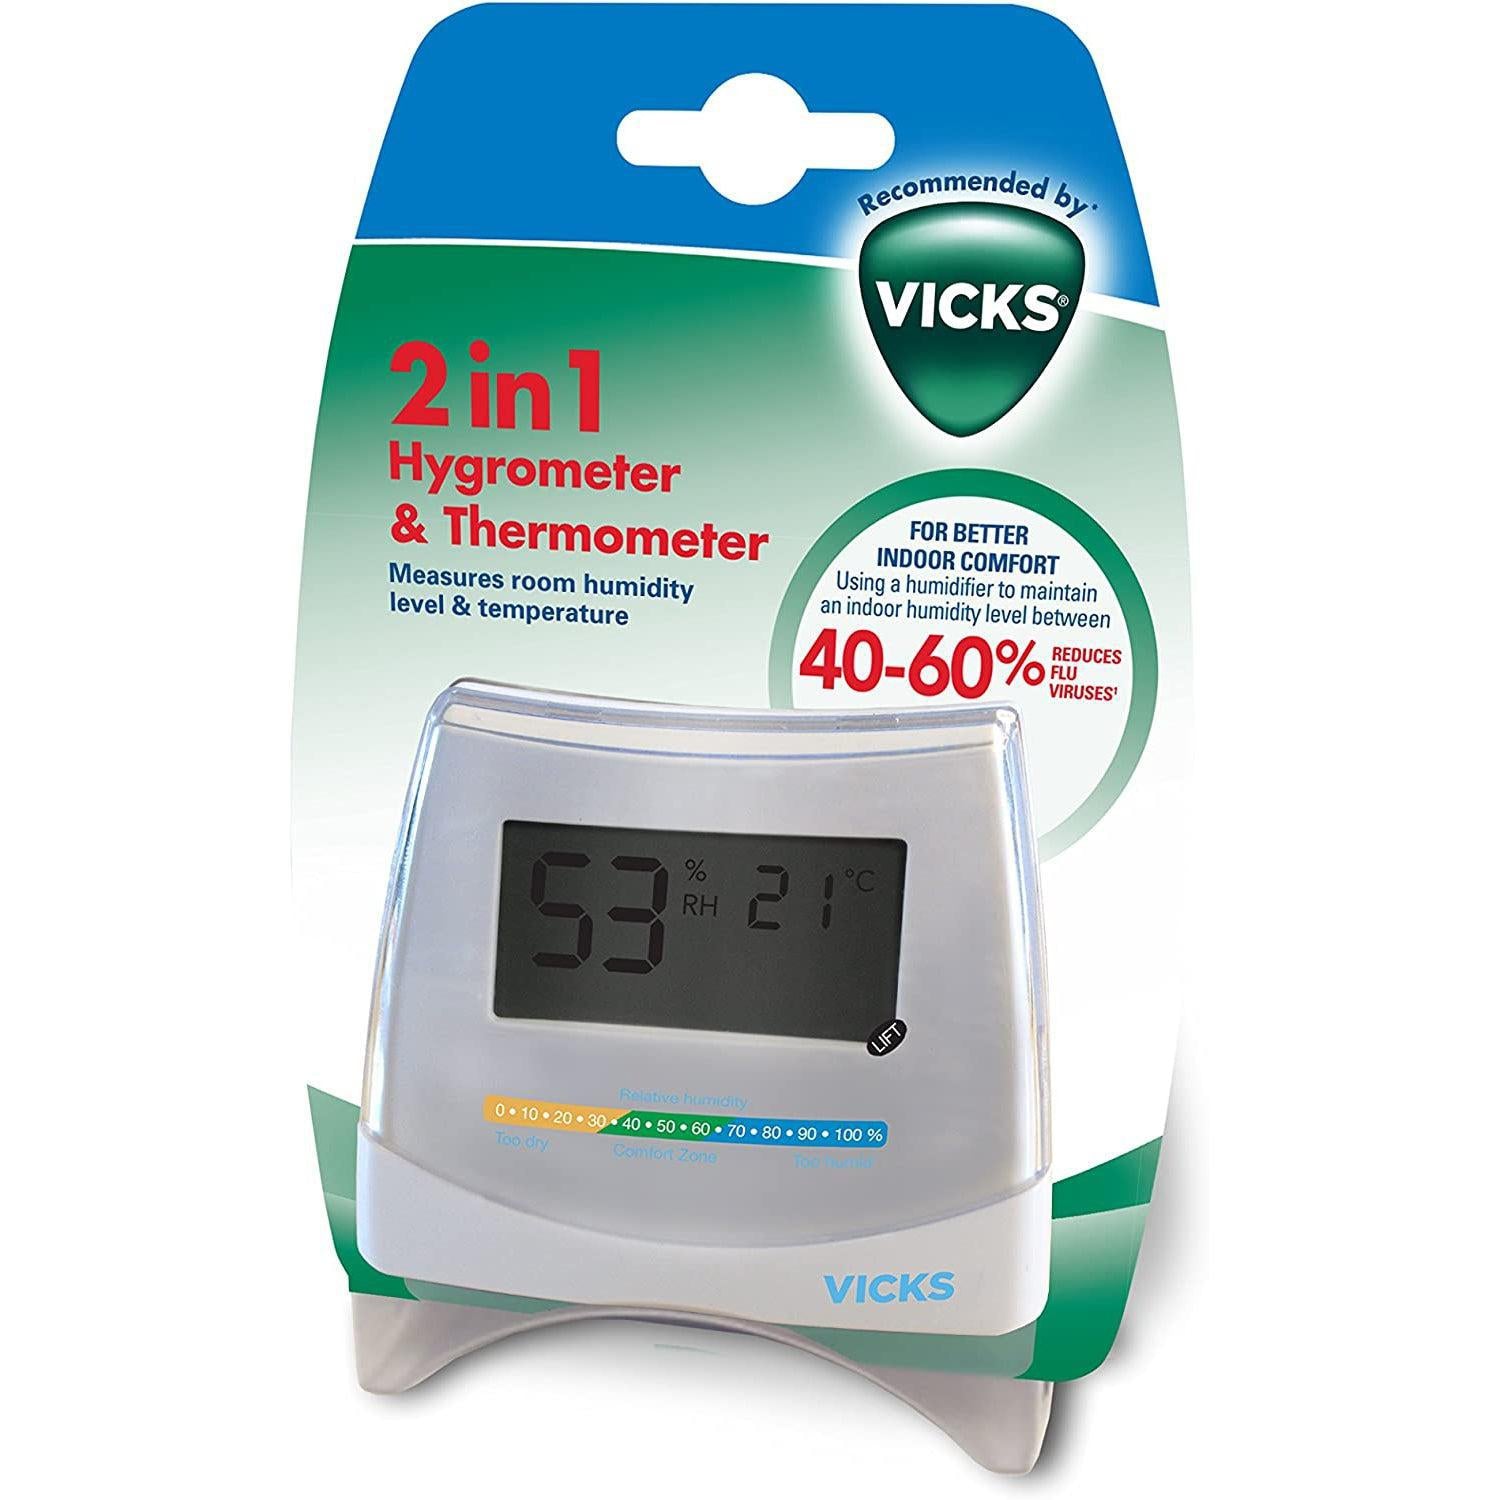 Vicks 2-in-1 Hygrometer and Thermometer V70 - Measures room humidity and temperature for better indoor comfort - Healthxpress.ie